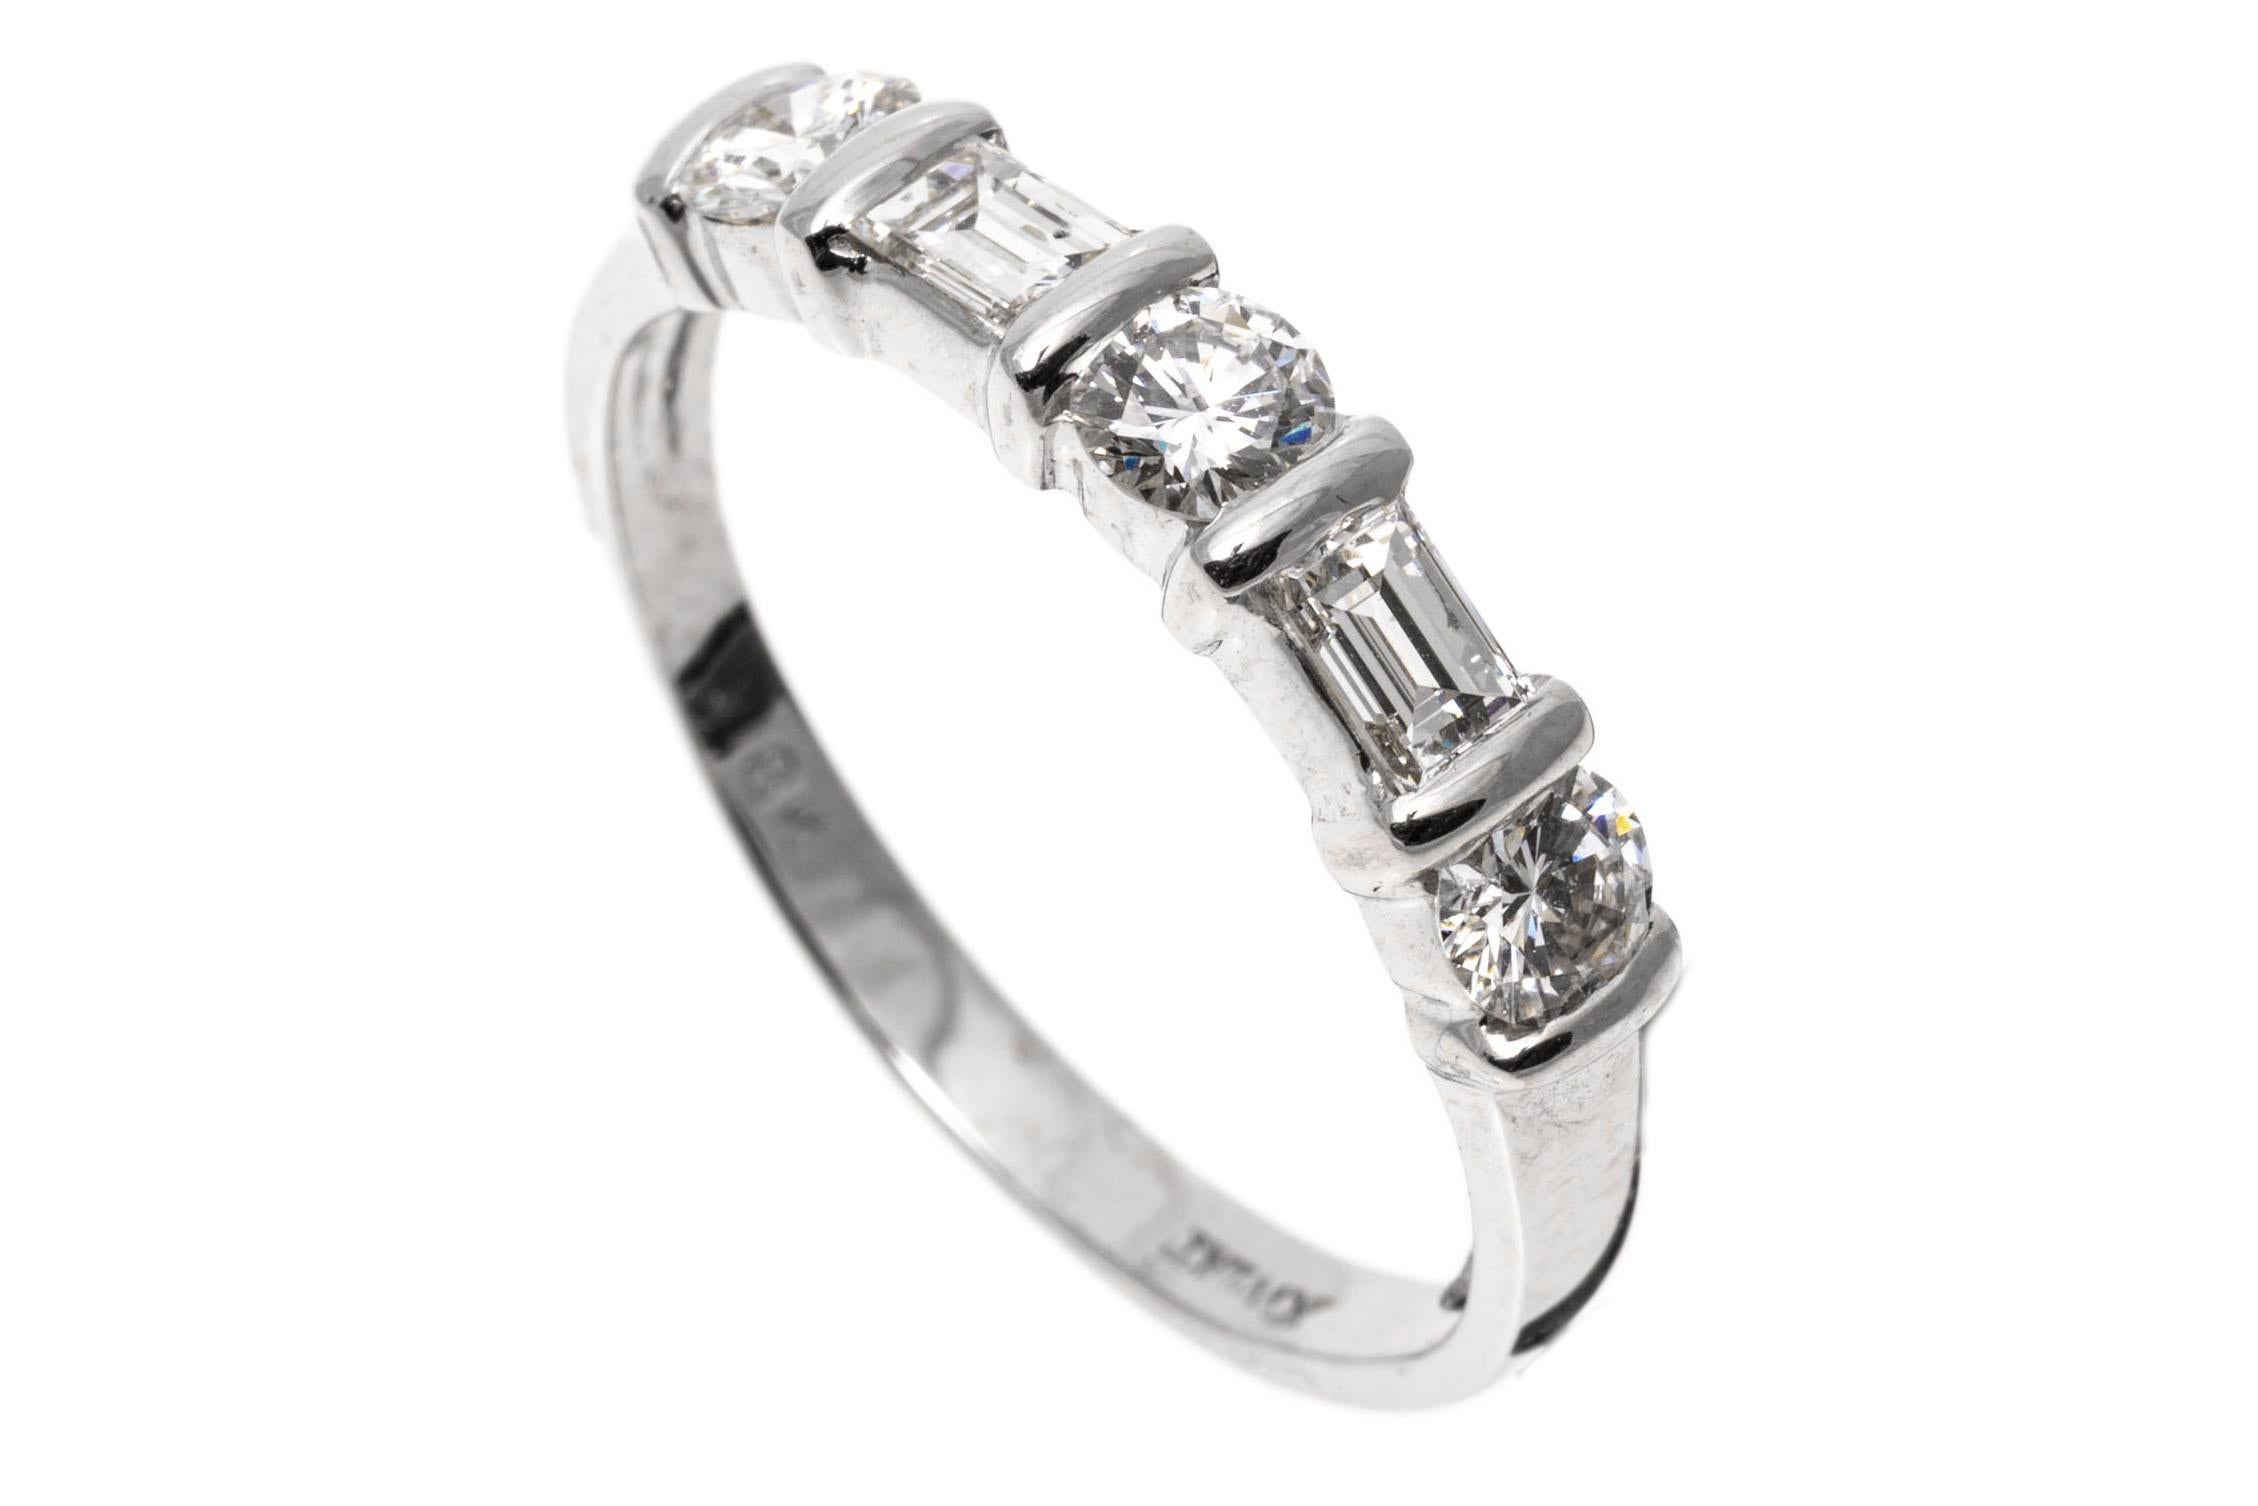 18k white gold ring. This gorgeous five stone, bar set band ring is set with three round brilliant cut diamonds, approximately 0.48 TCW, alternating with two large baguette cut diamonds, approximately 0.20 TCW, and finished with a high polished